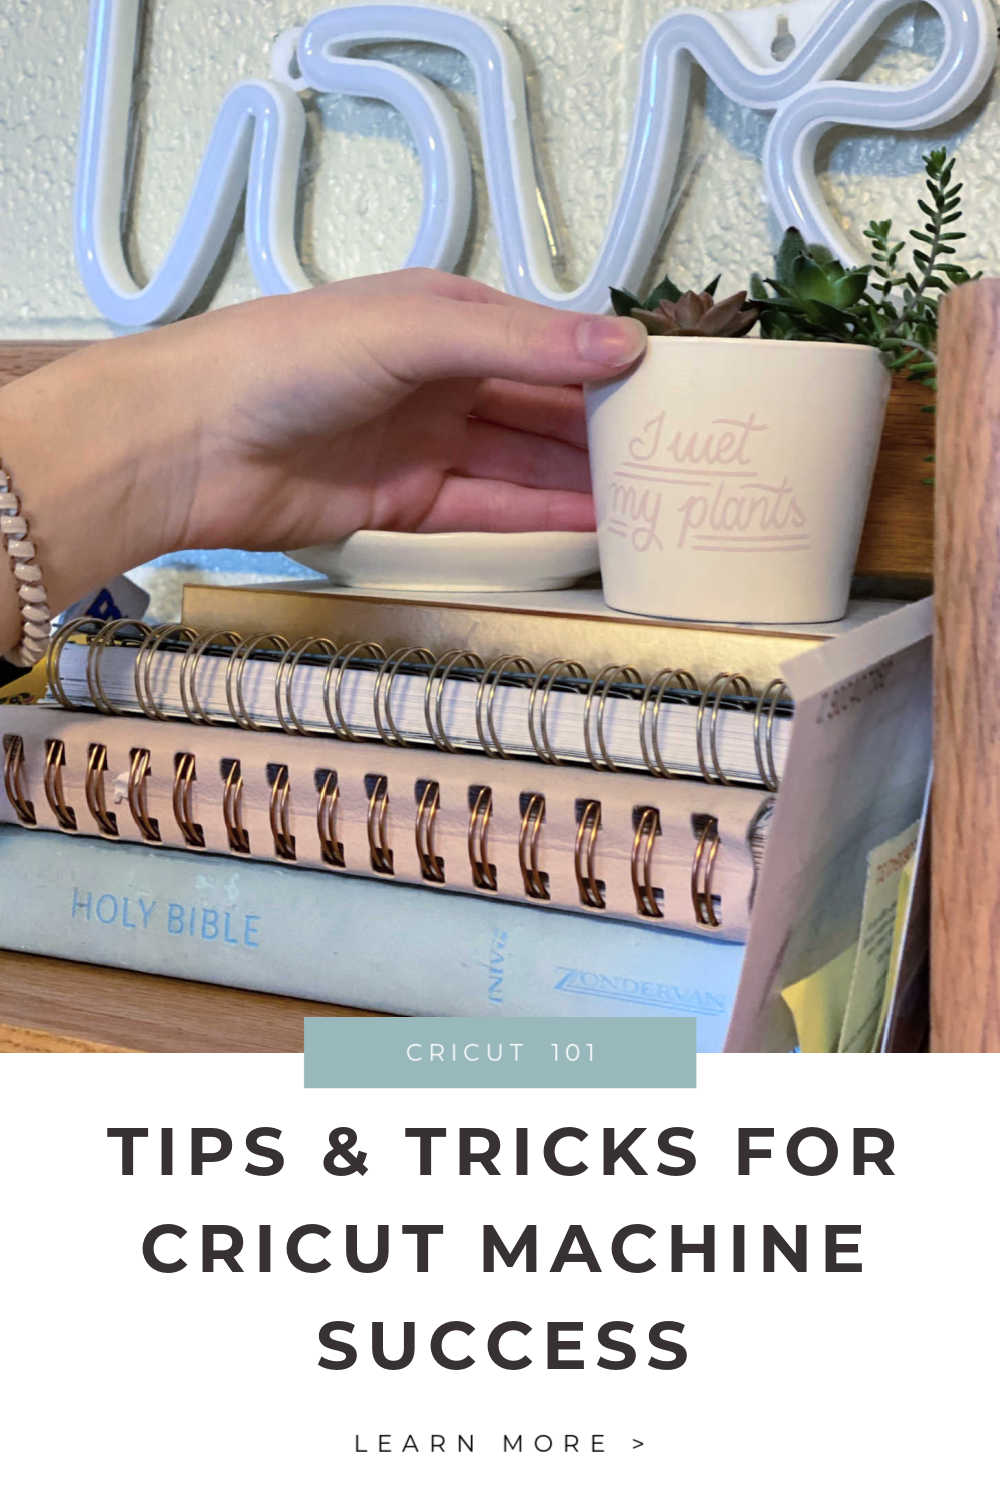 TIPS AND TRICKS FOR CRICUT MACHINE SUCCESS